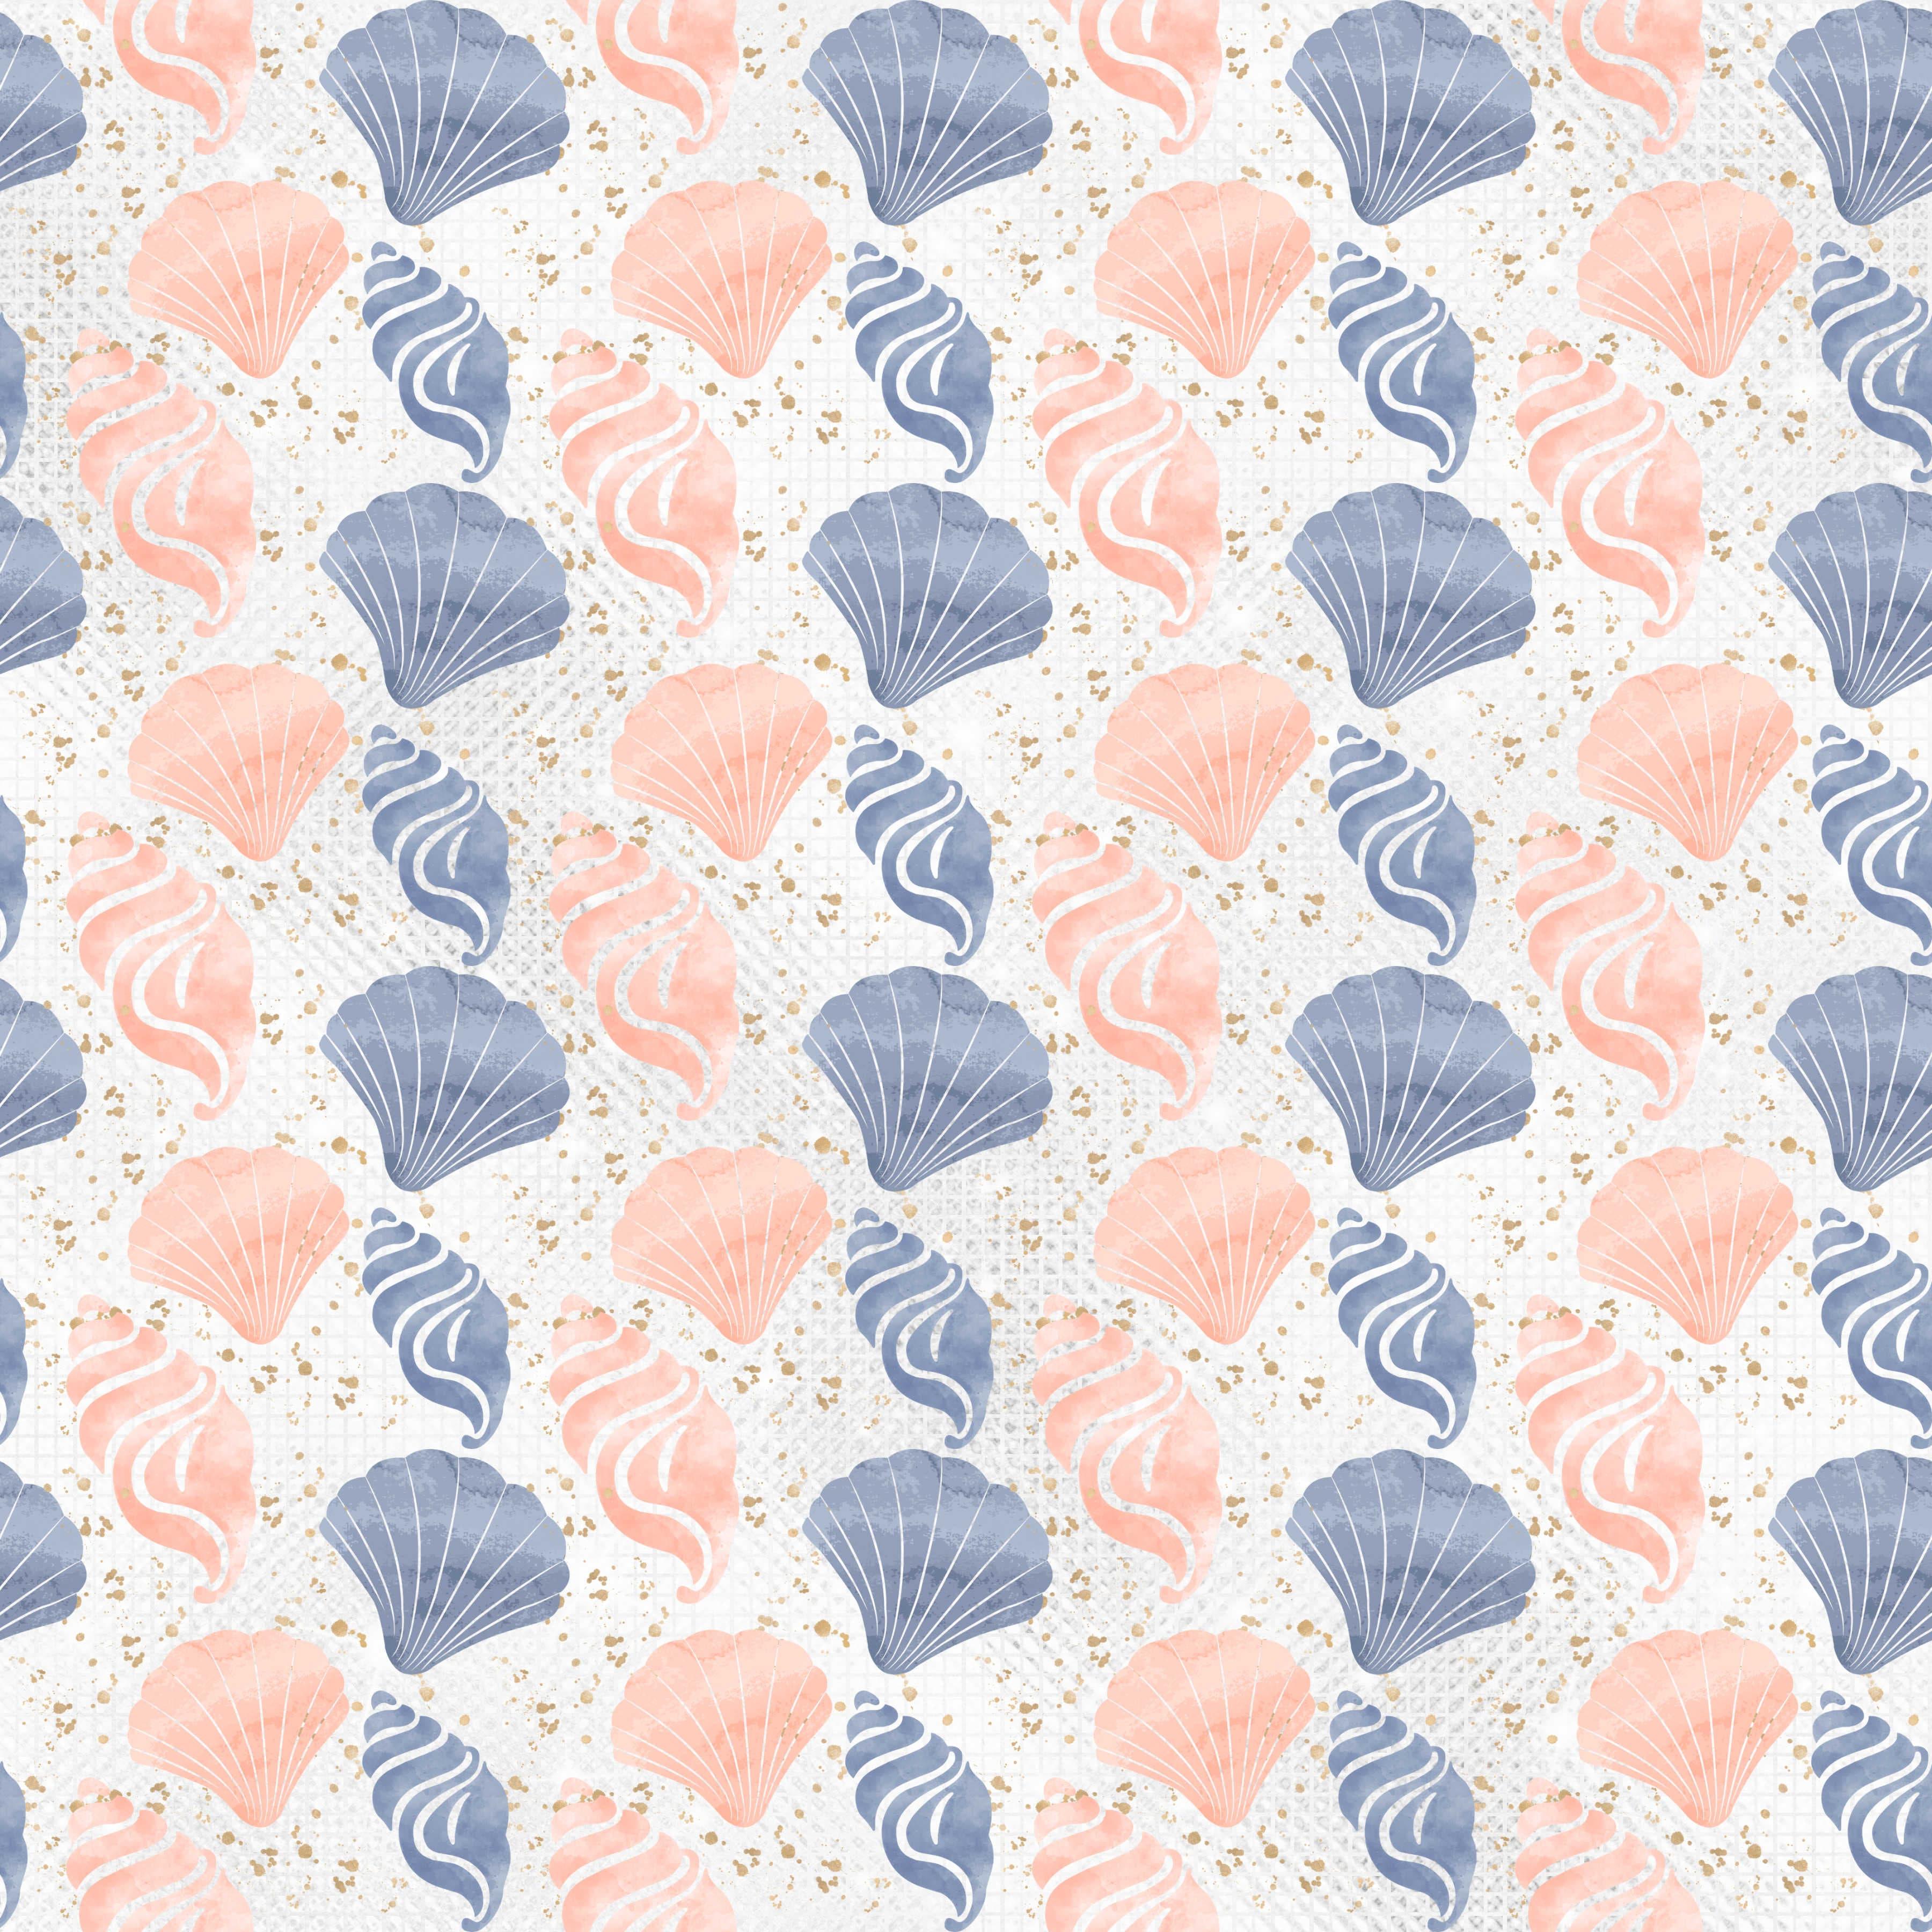 Seaside Wedding Collection Shells Aplenty 12 x 12 Double-Sided Scrapbook Paper by SSC Designs - Scrapbook Supply Companies